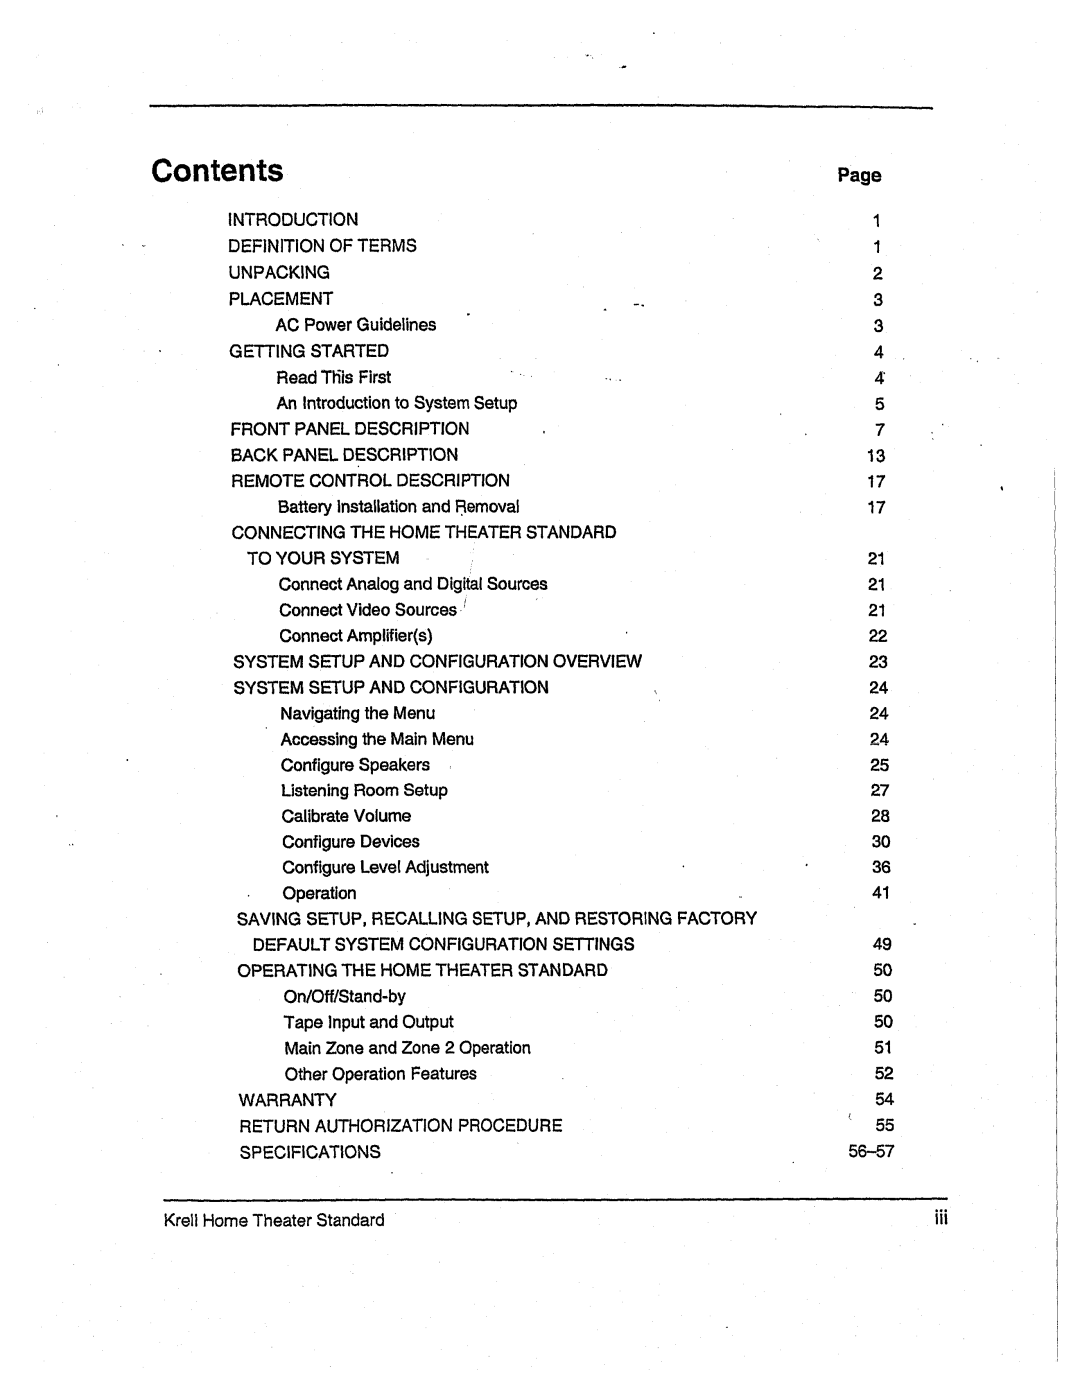 Krell Industries None manual Contents, Page 